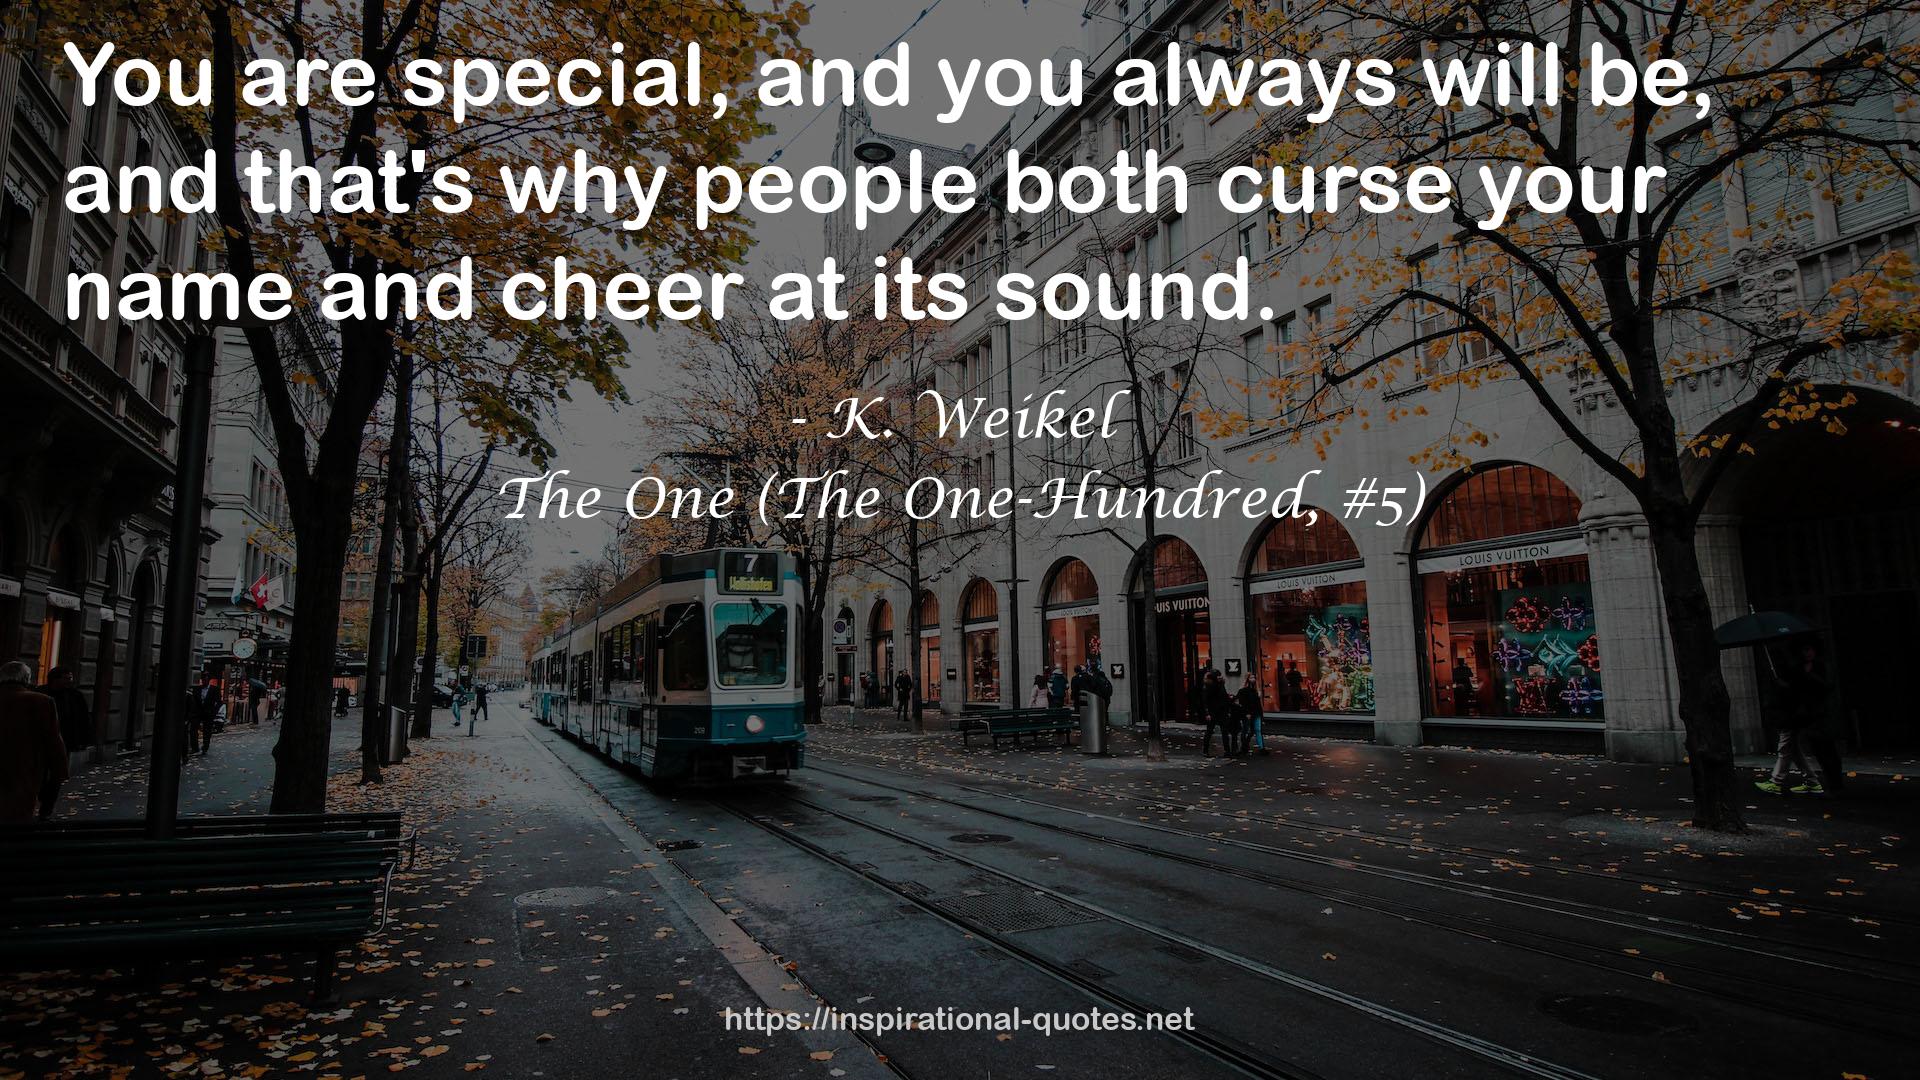 The One (The One-Hundred, #5) QUOTES